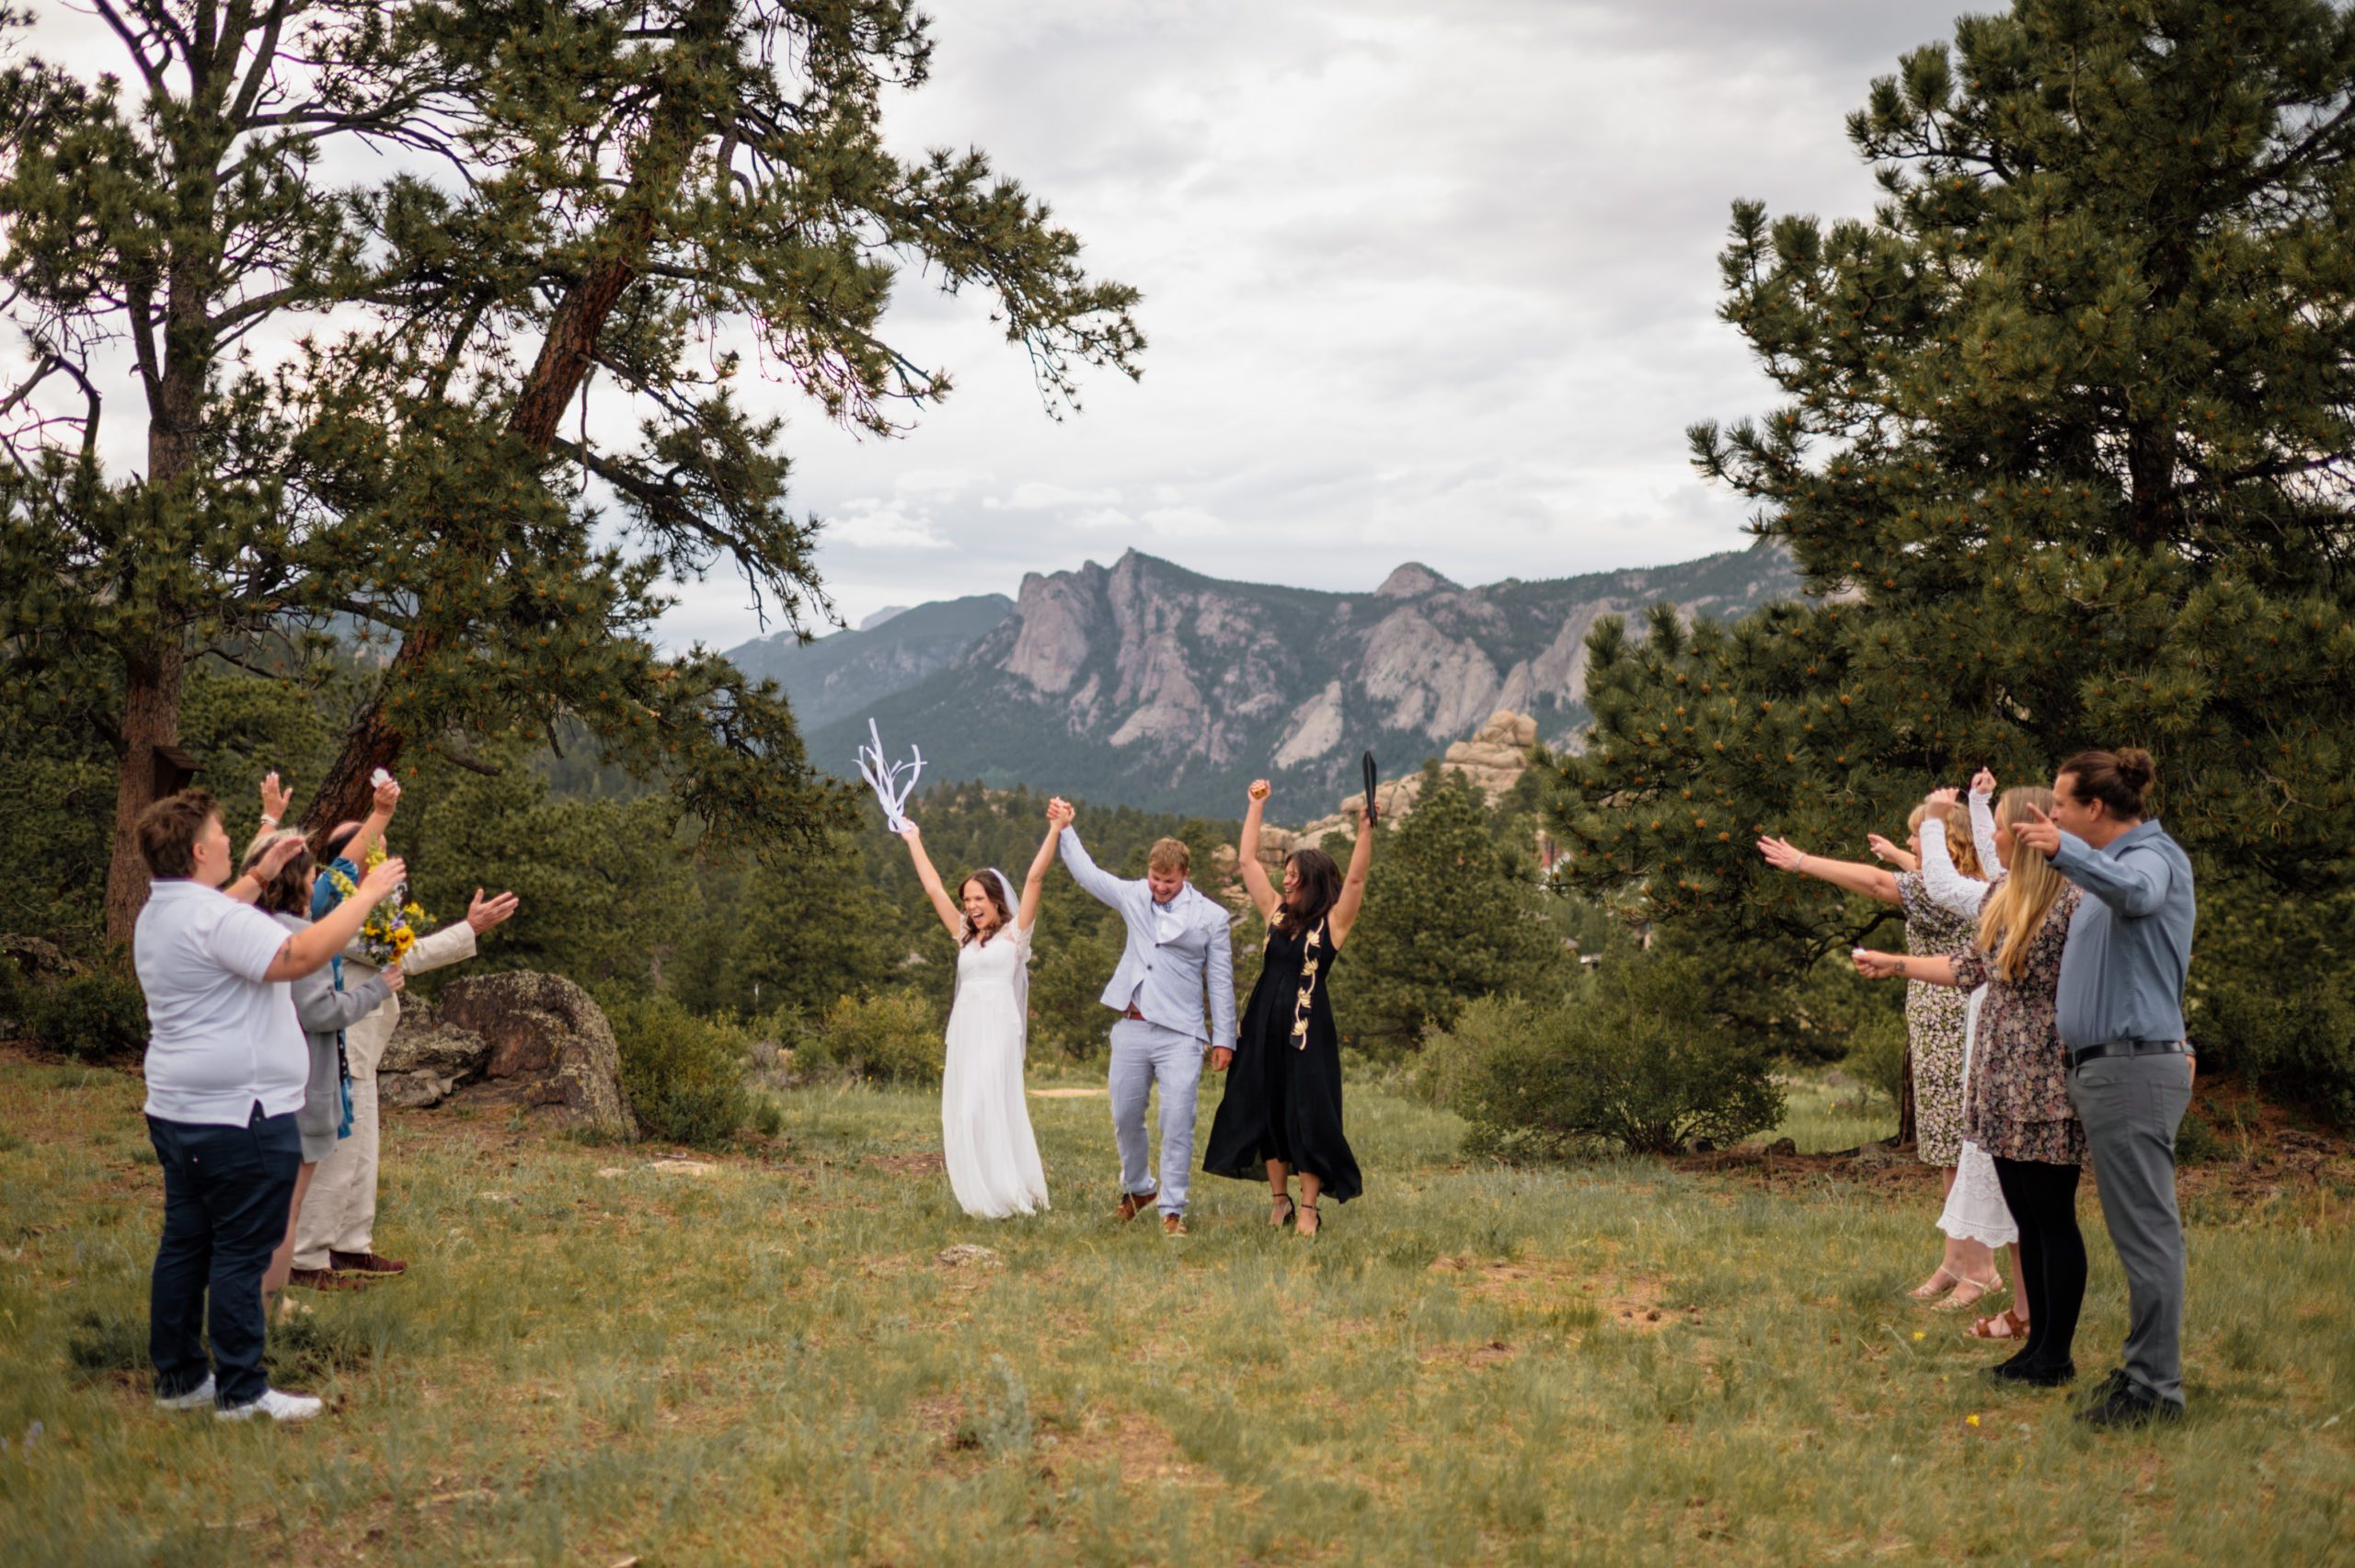 The bride and groom in celebration after their elopement ceremony at Knoll Willows in Estes Park.